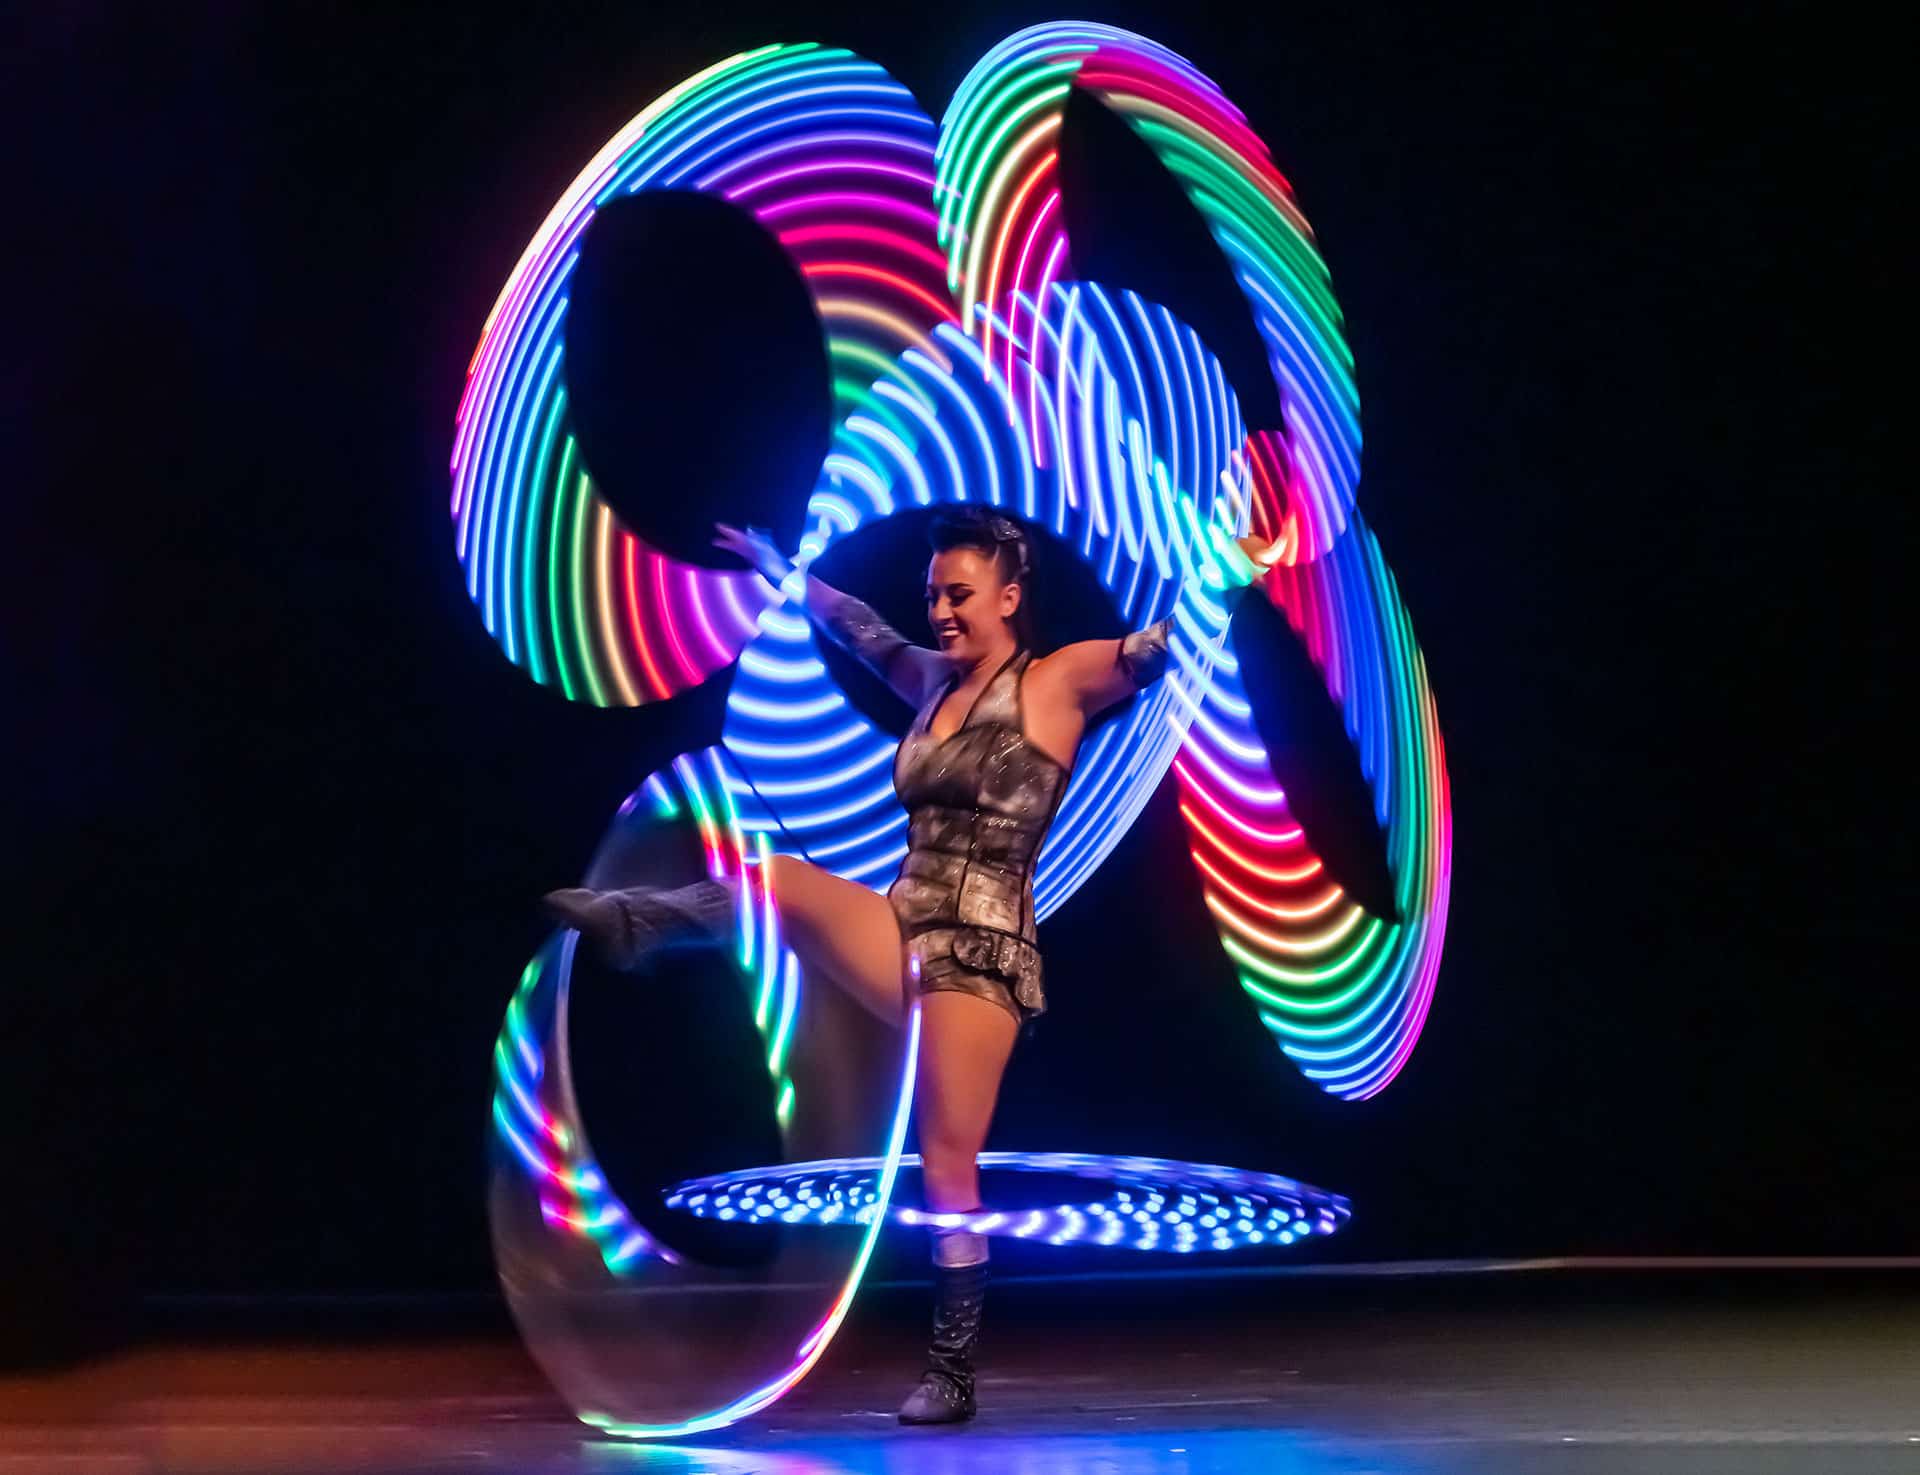  A woman stands with one leg raised, surrounded by multicolored lights.